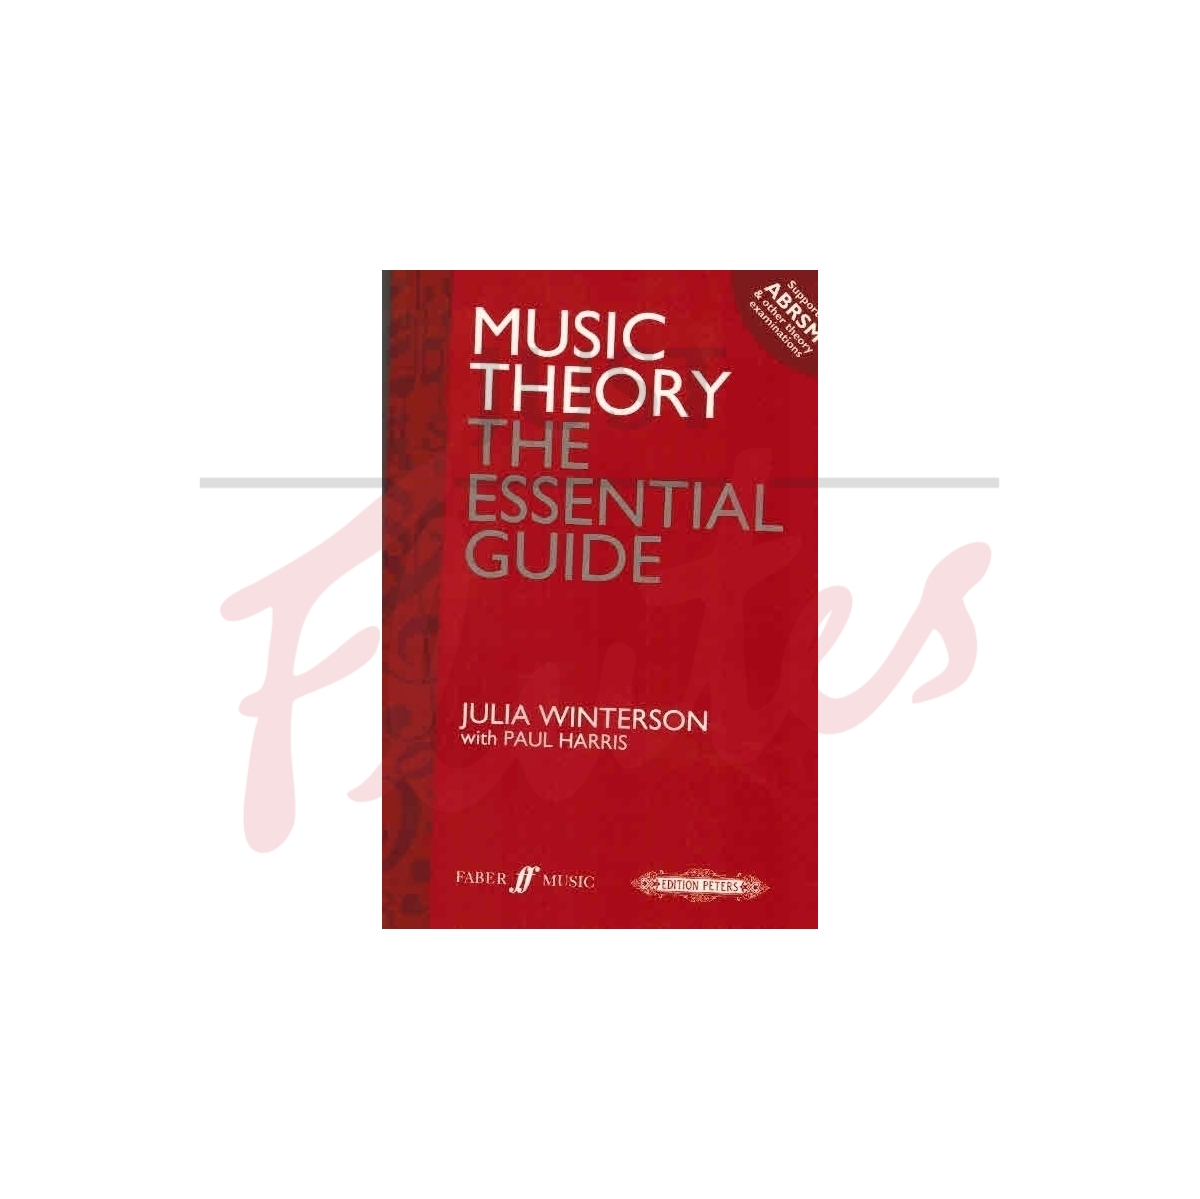 Music Theory - The Essential Guide